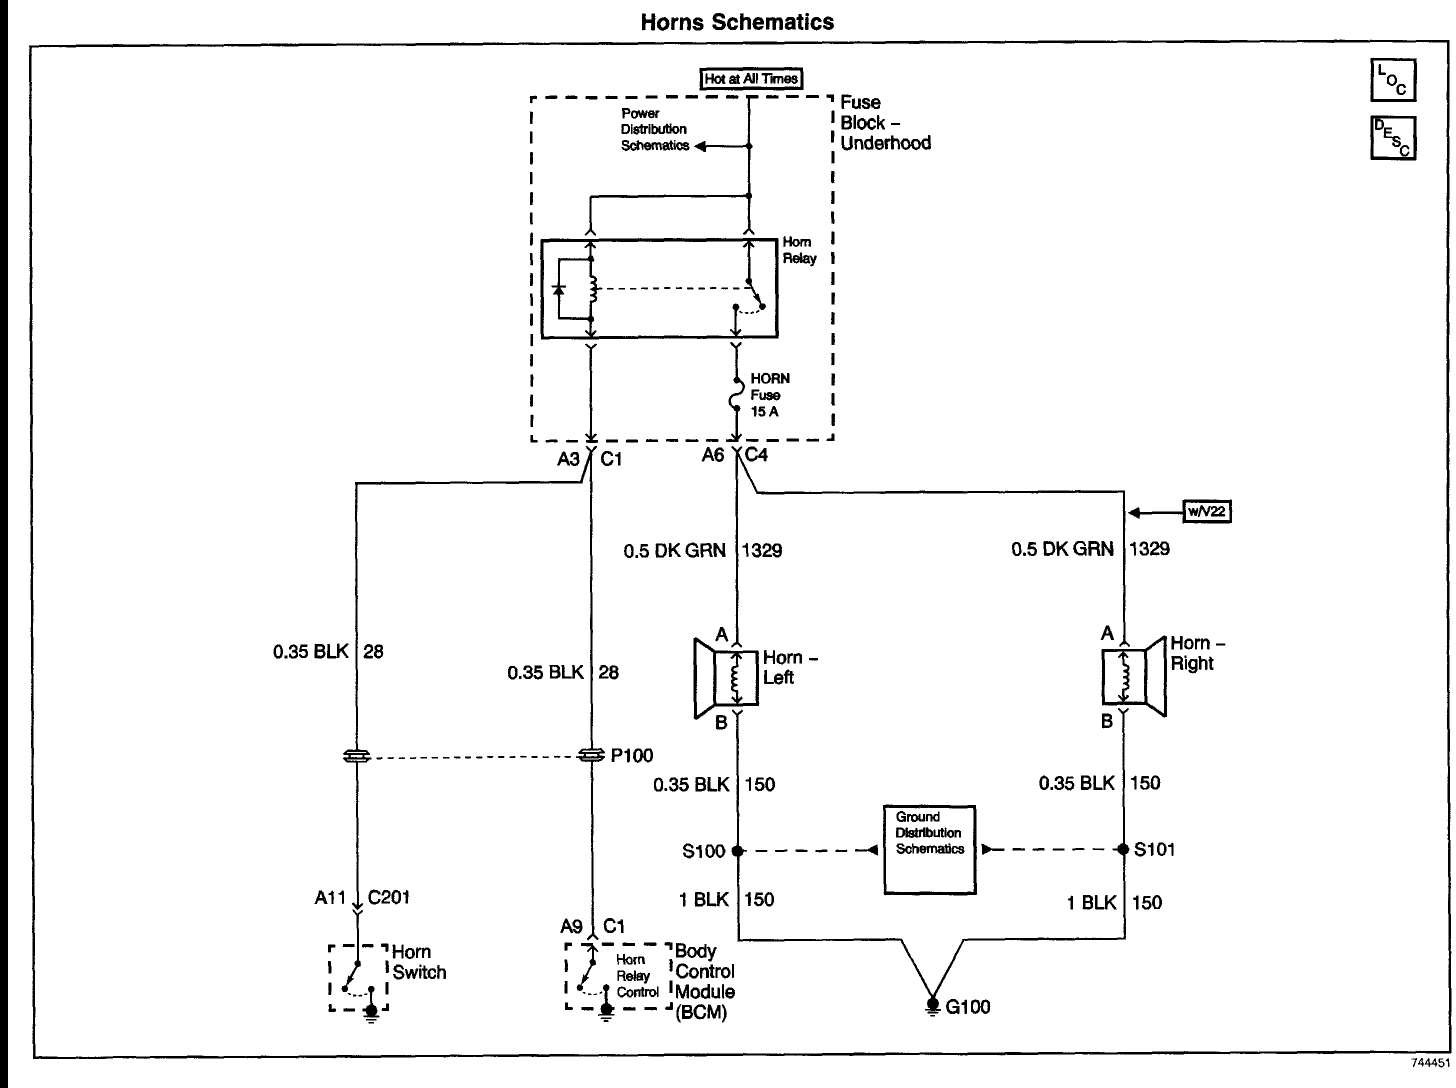 2004 Chevy Silverado Wiring Harness Diagram from img201.imageshack.us